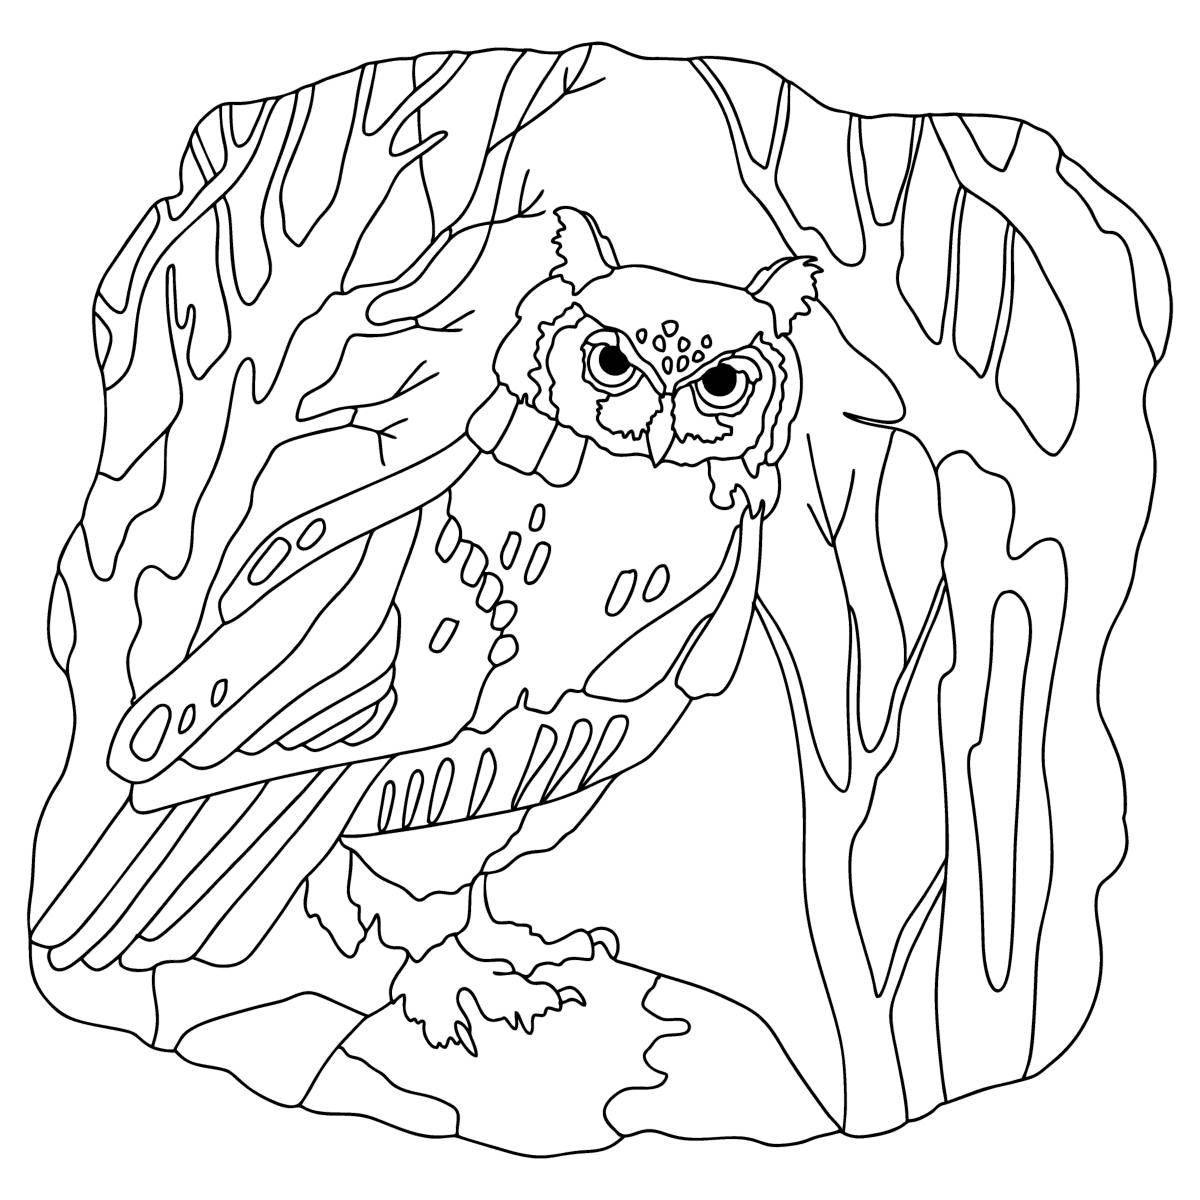 Playful owl coloring by numbers